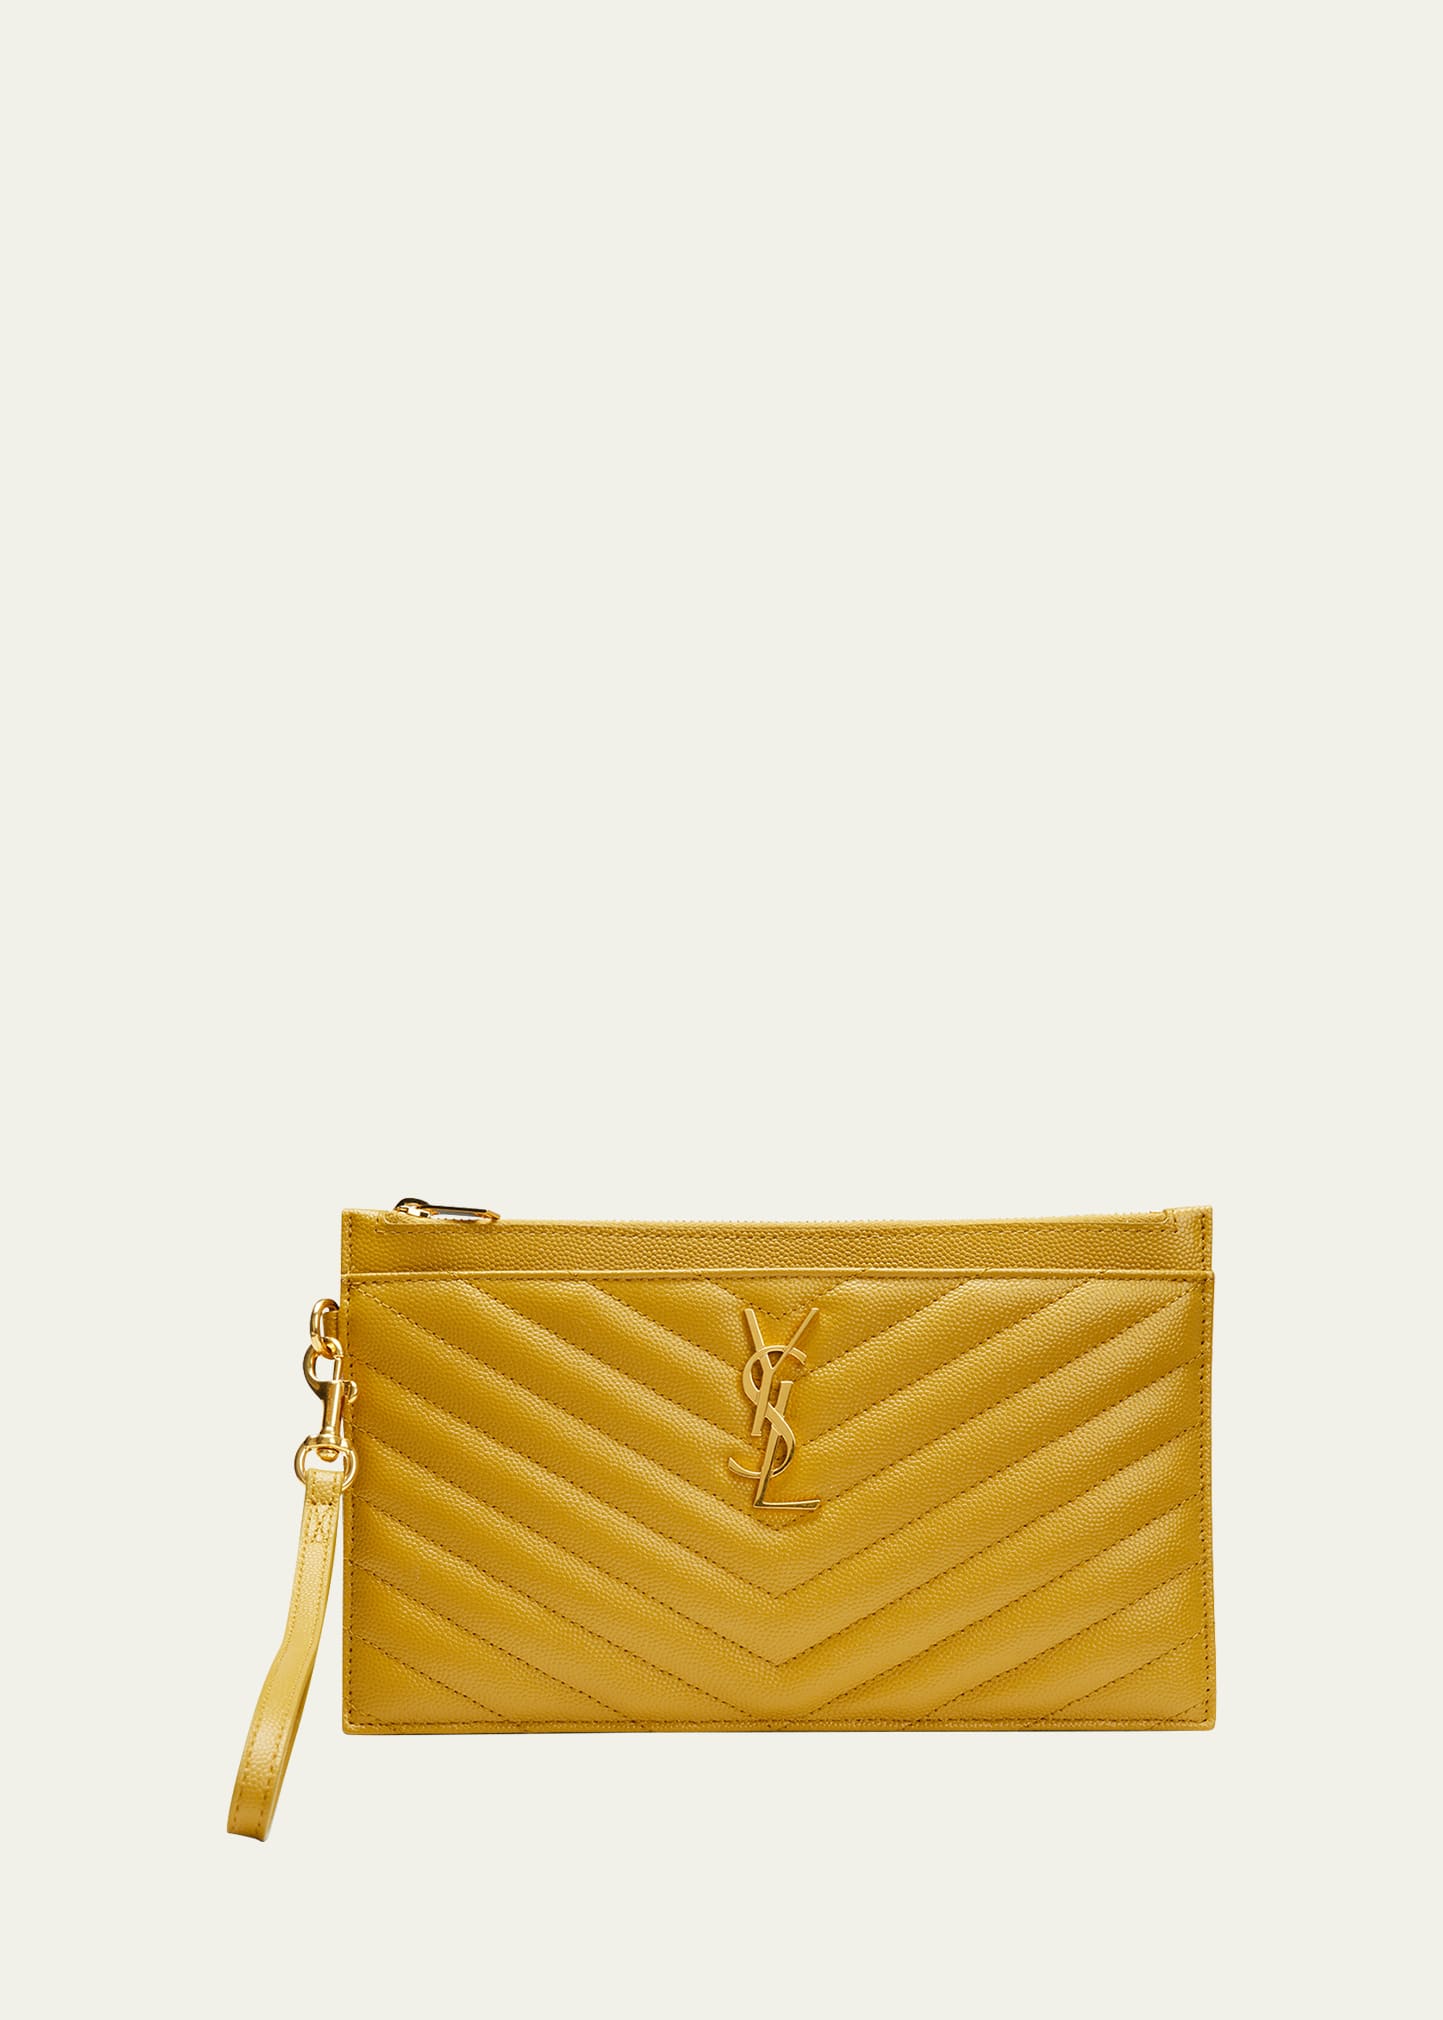 Saint Laurent Large Quilted Ysl Zip Wristlet In Light Chartreuse